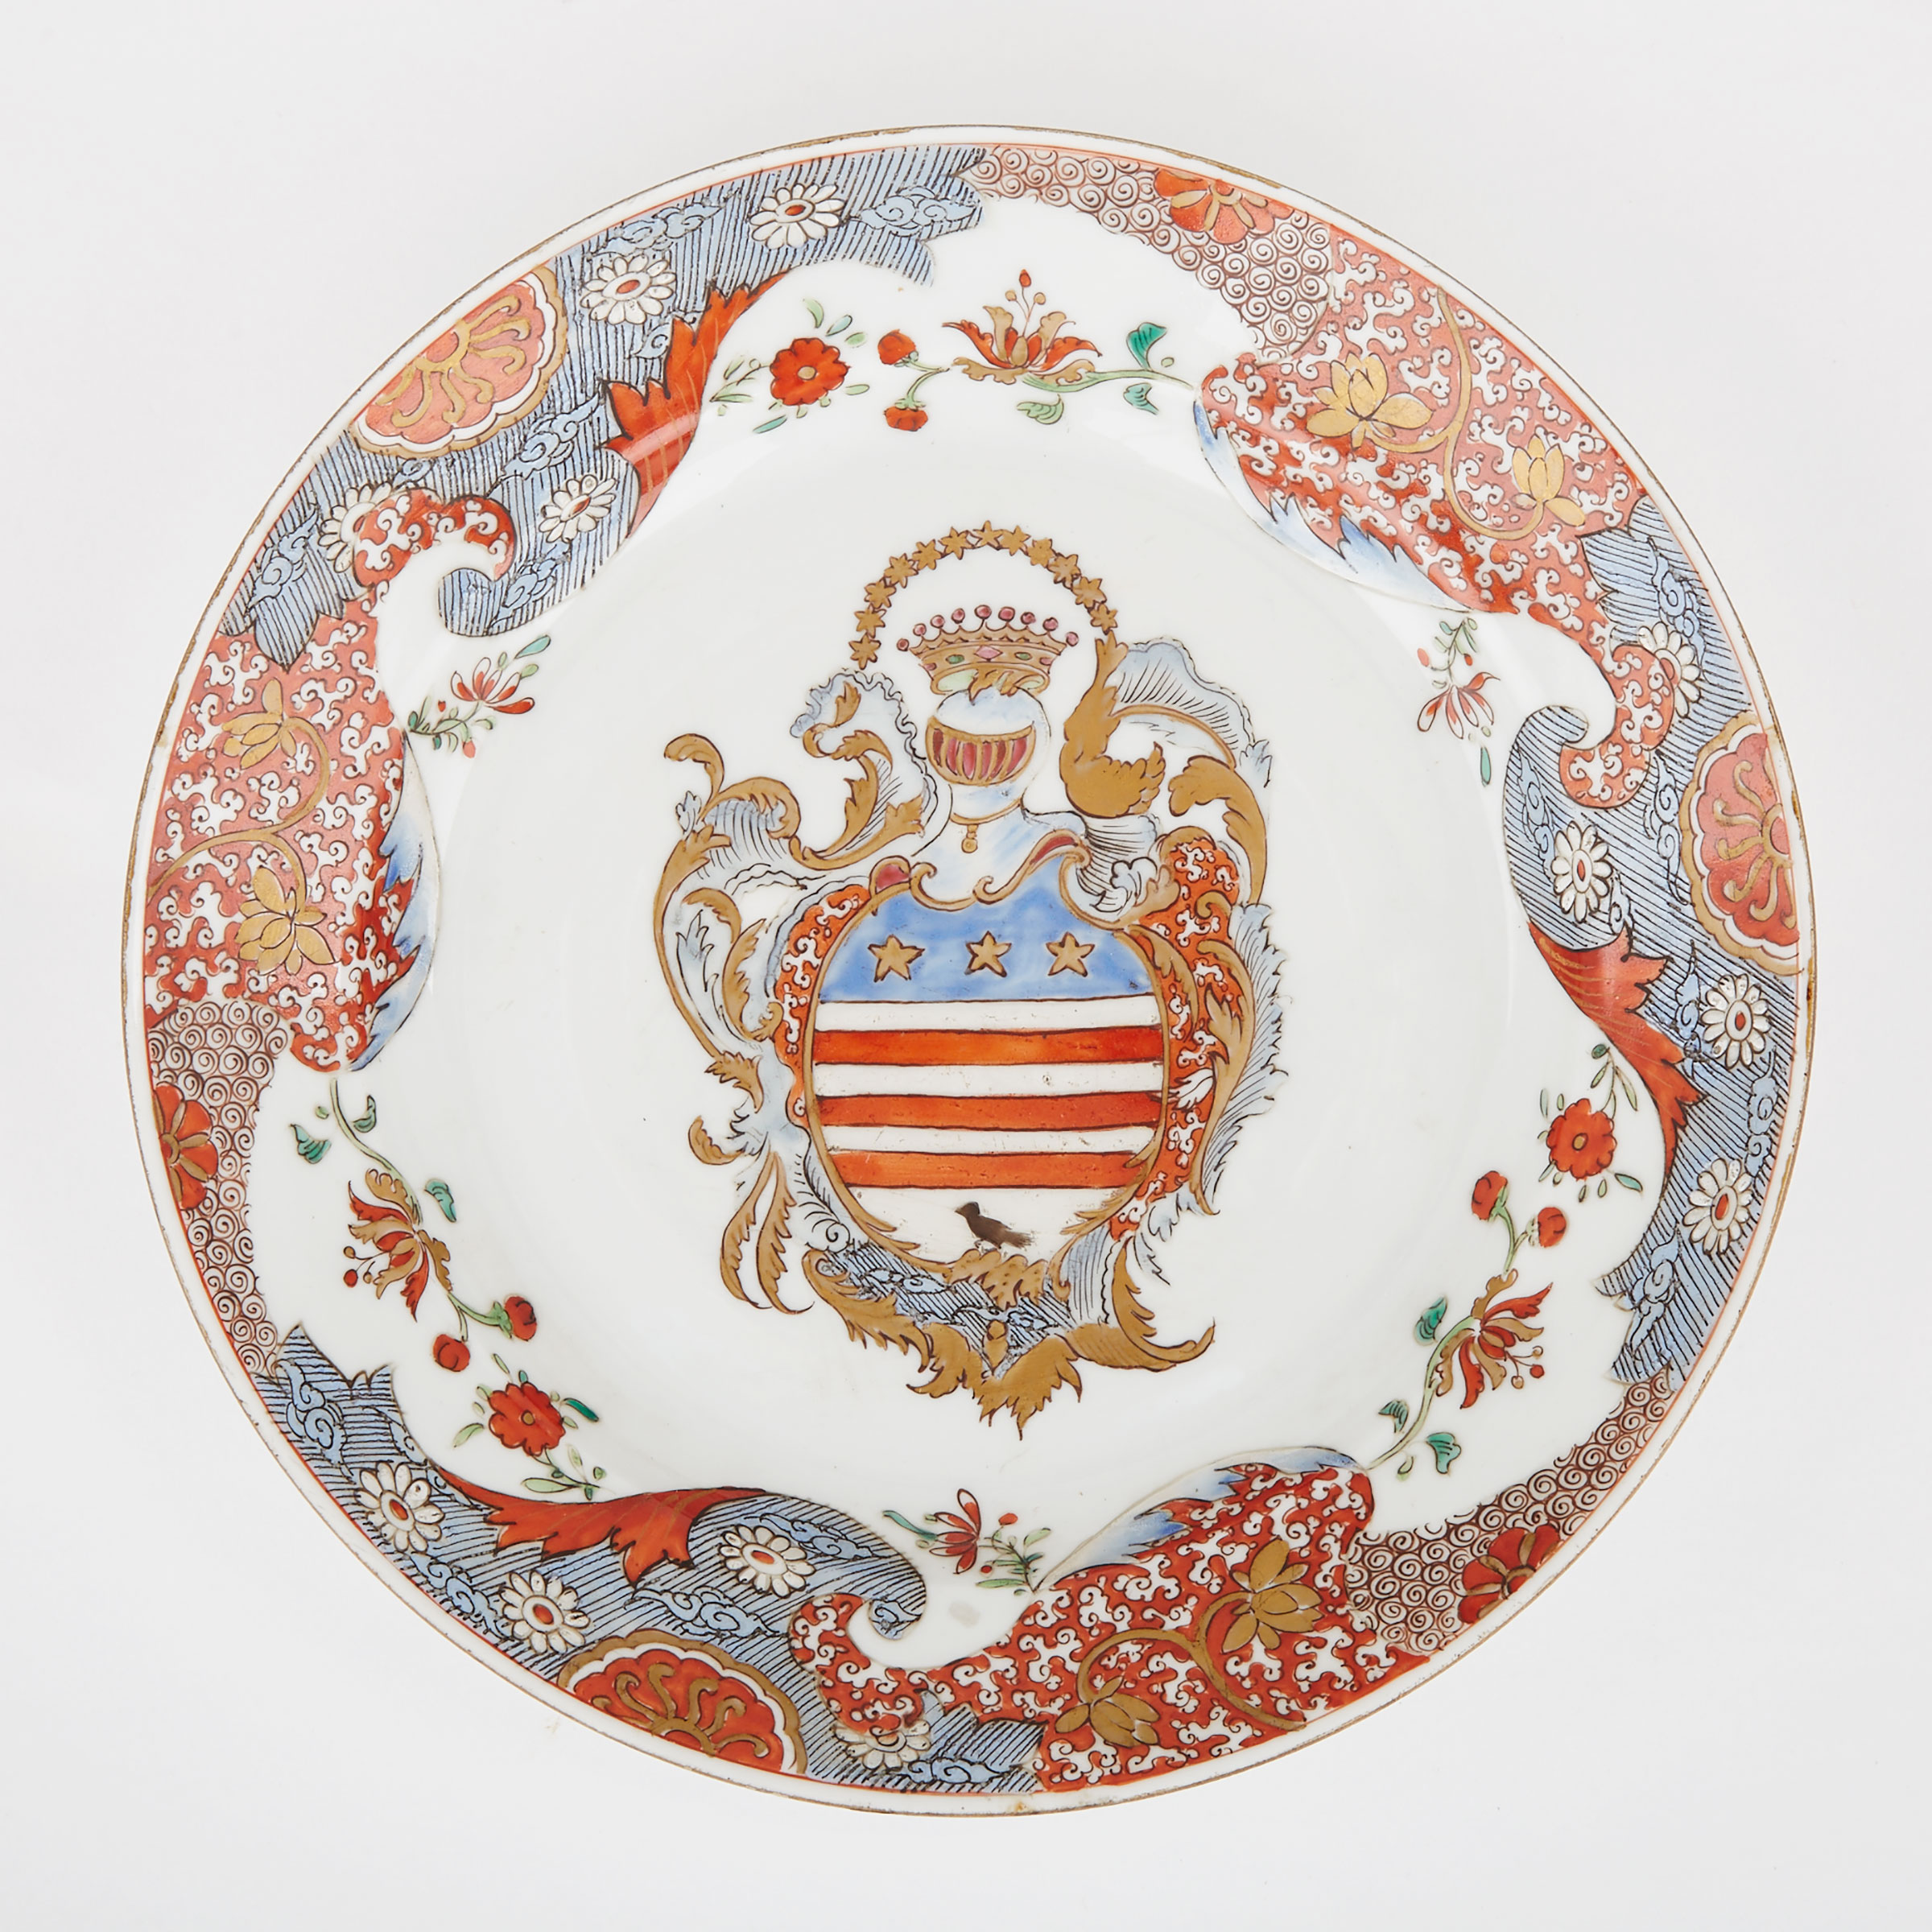 Japanese Export Style Porcelain Armorial Plate, possibly French, 19th century